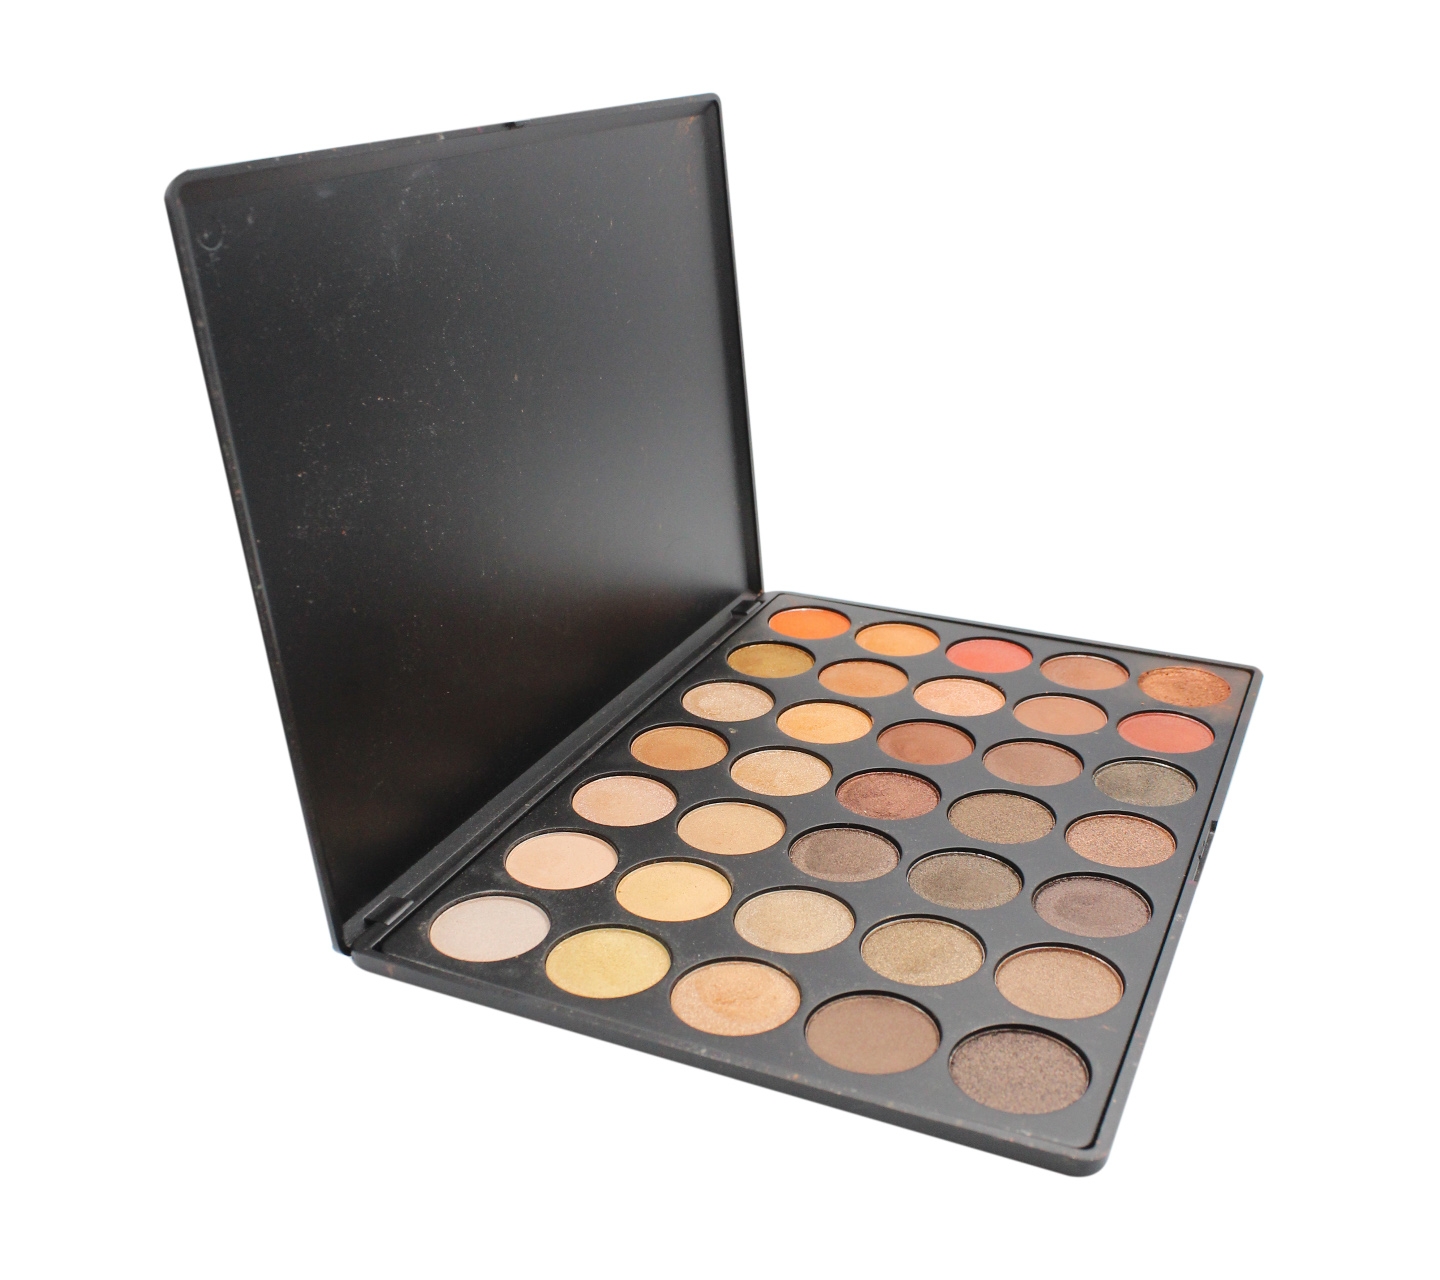 Morphe 35O Nature Glow Eyeshadow Sets and Palette